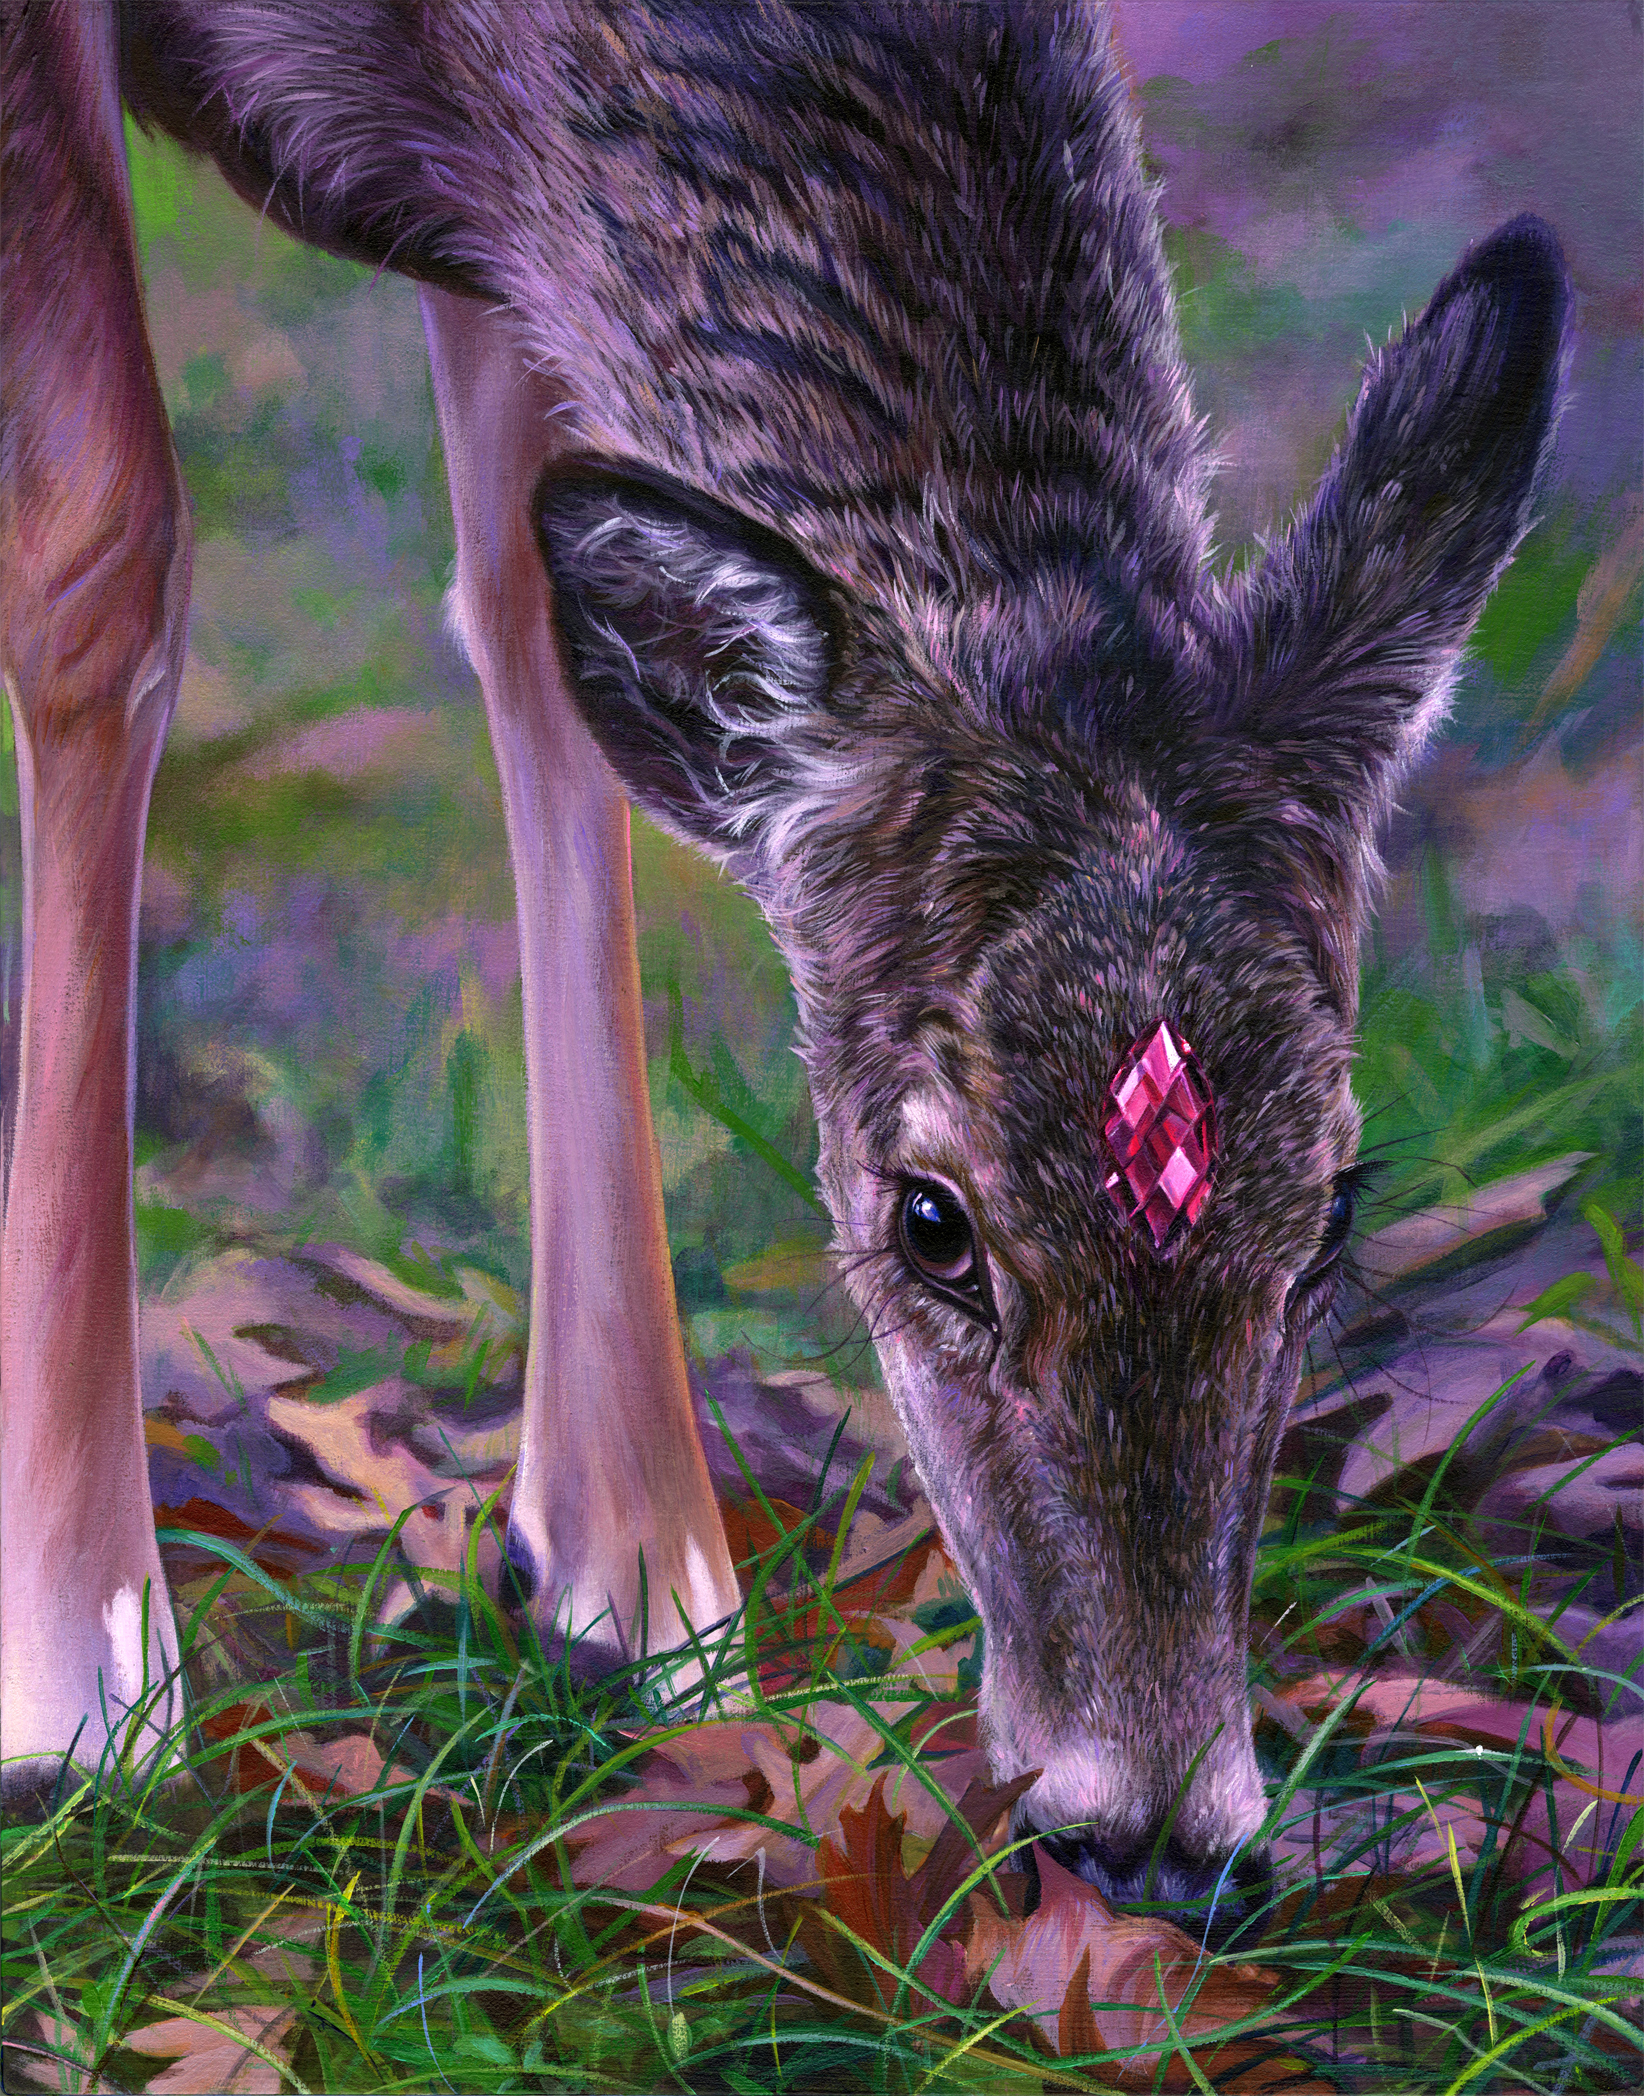 an acrylic painting of a young deer eating grass, looking at the viewer, with a pink crystal on its forehead